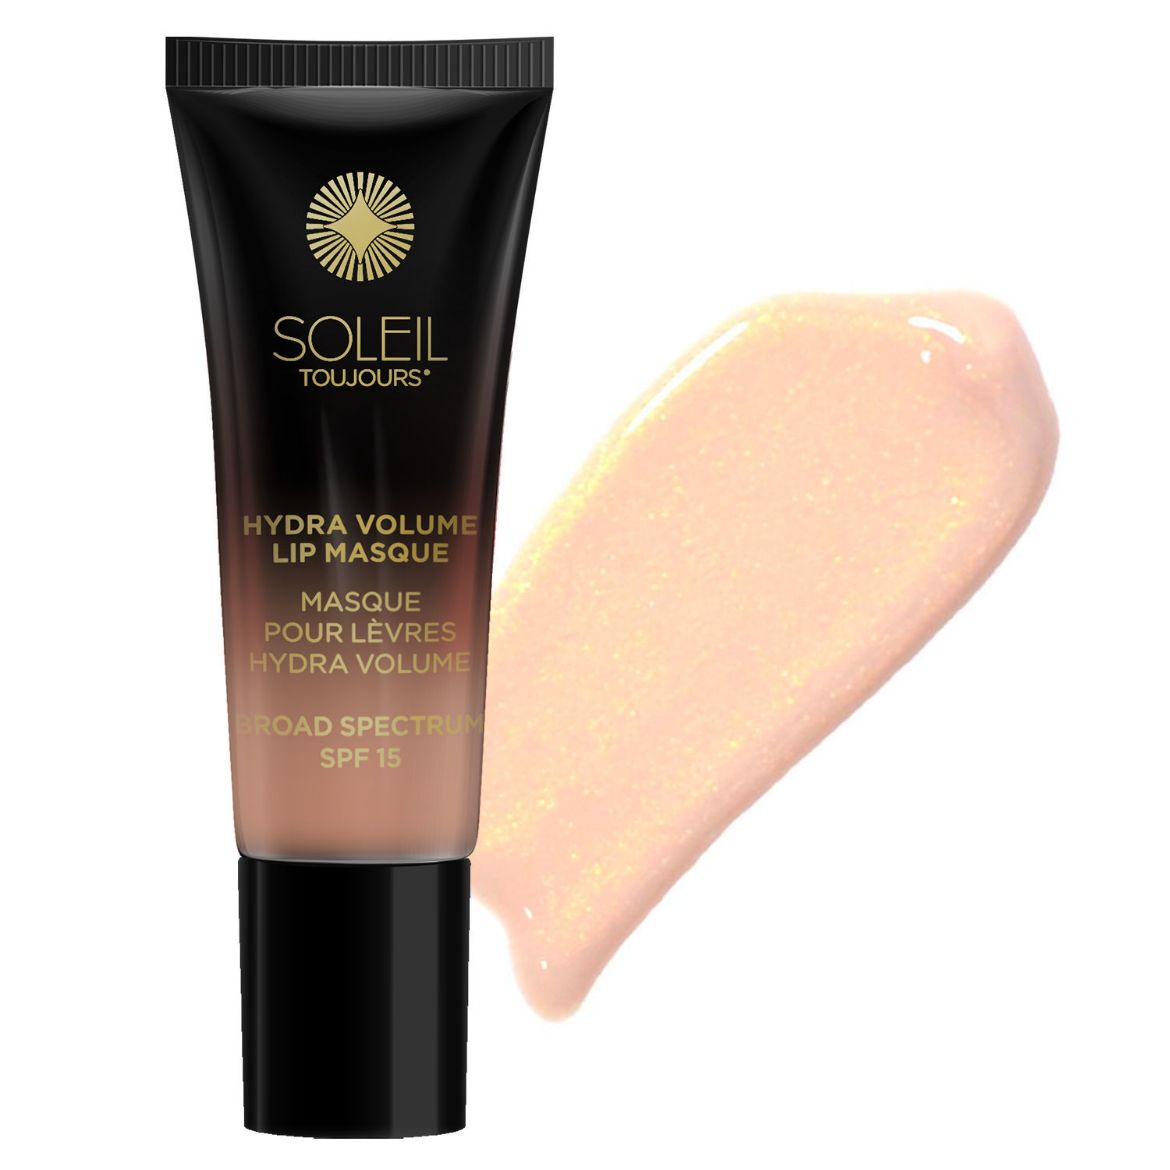 Image of Soleil Toujours Mineral Hydra Volume Lip Masque SPF 15 - Sip Sip (10ml)